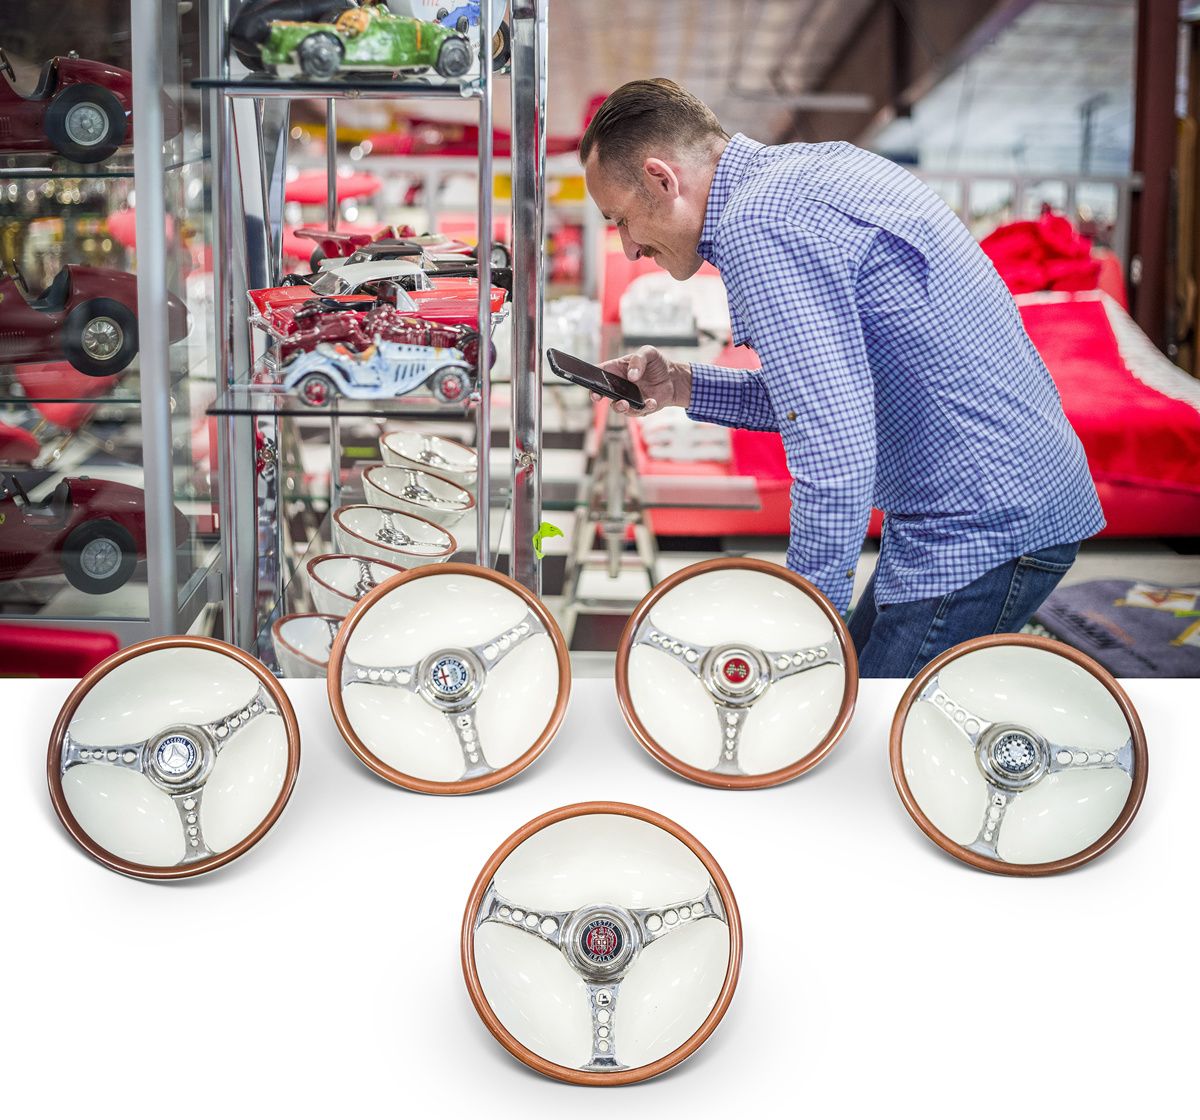 Les Leston Steering Wheel Ashtrays offered at RM Sotheby’s the Gene Ponder Collection live auction 2022